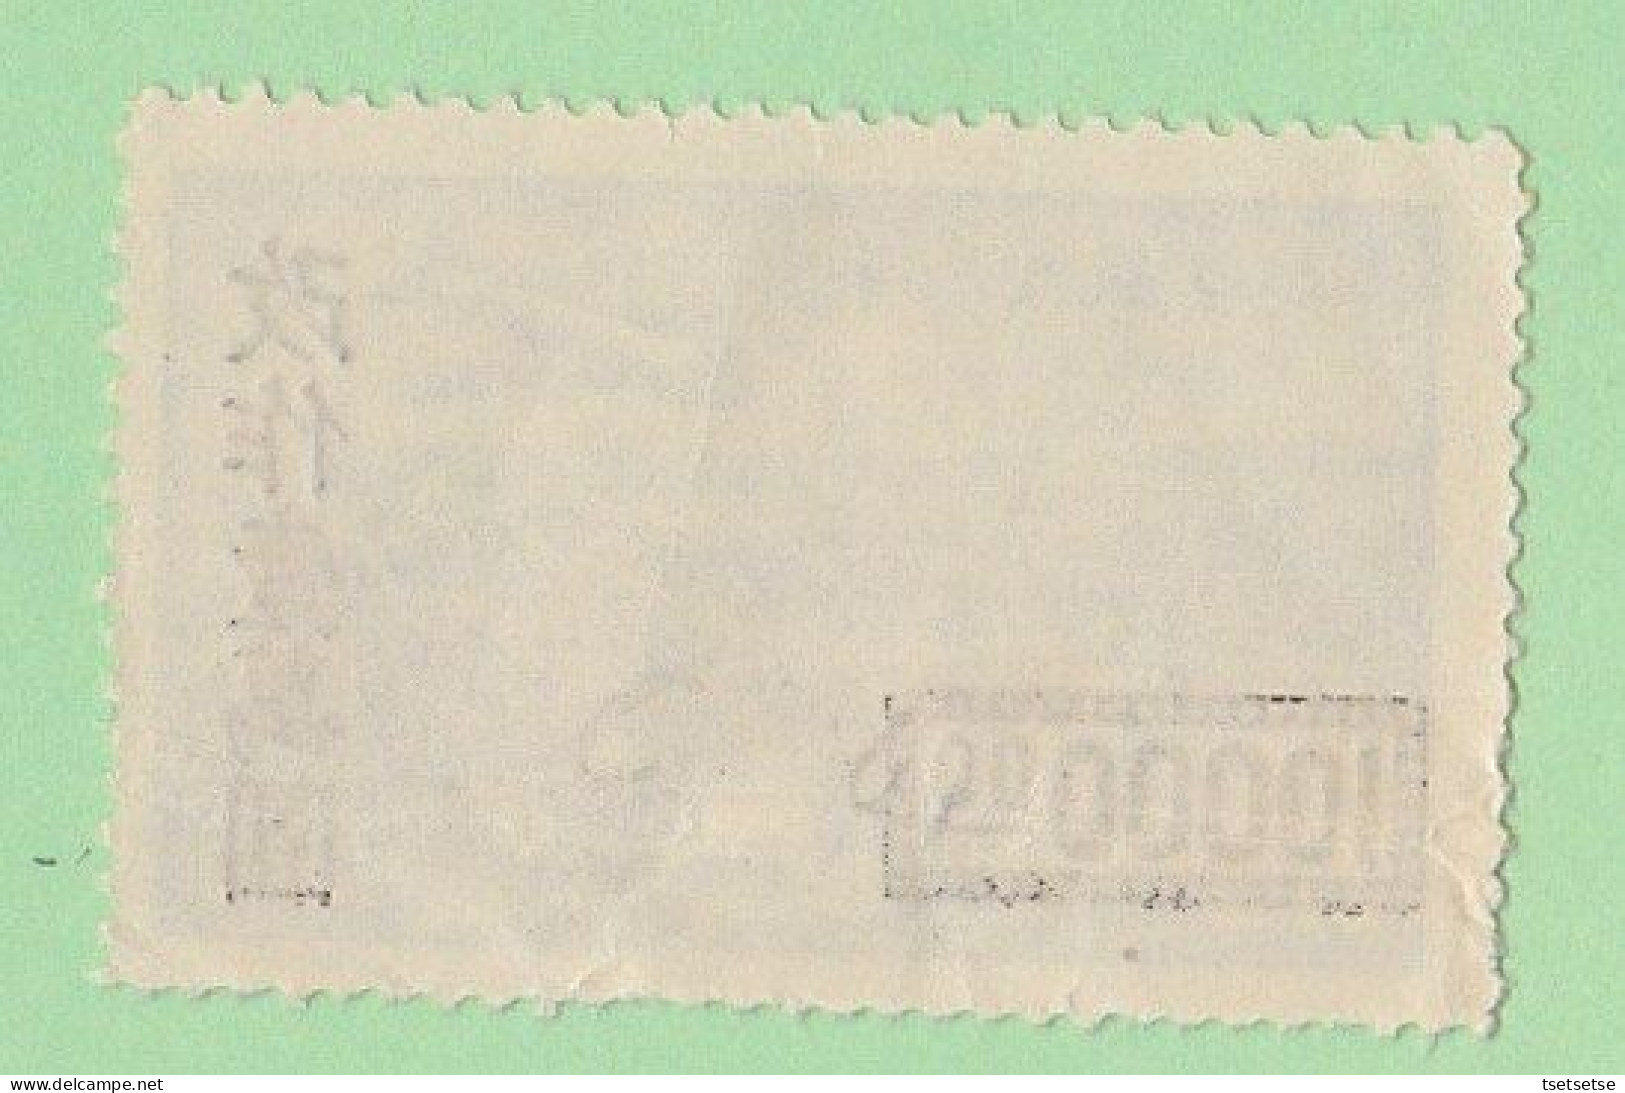 $85 CV! 1963 RO China Taiwan Land To The Tillers Stamp Set, #1383, Mint Unused VF H OG + Mint #C61 - Unused Stamps